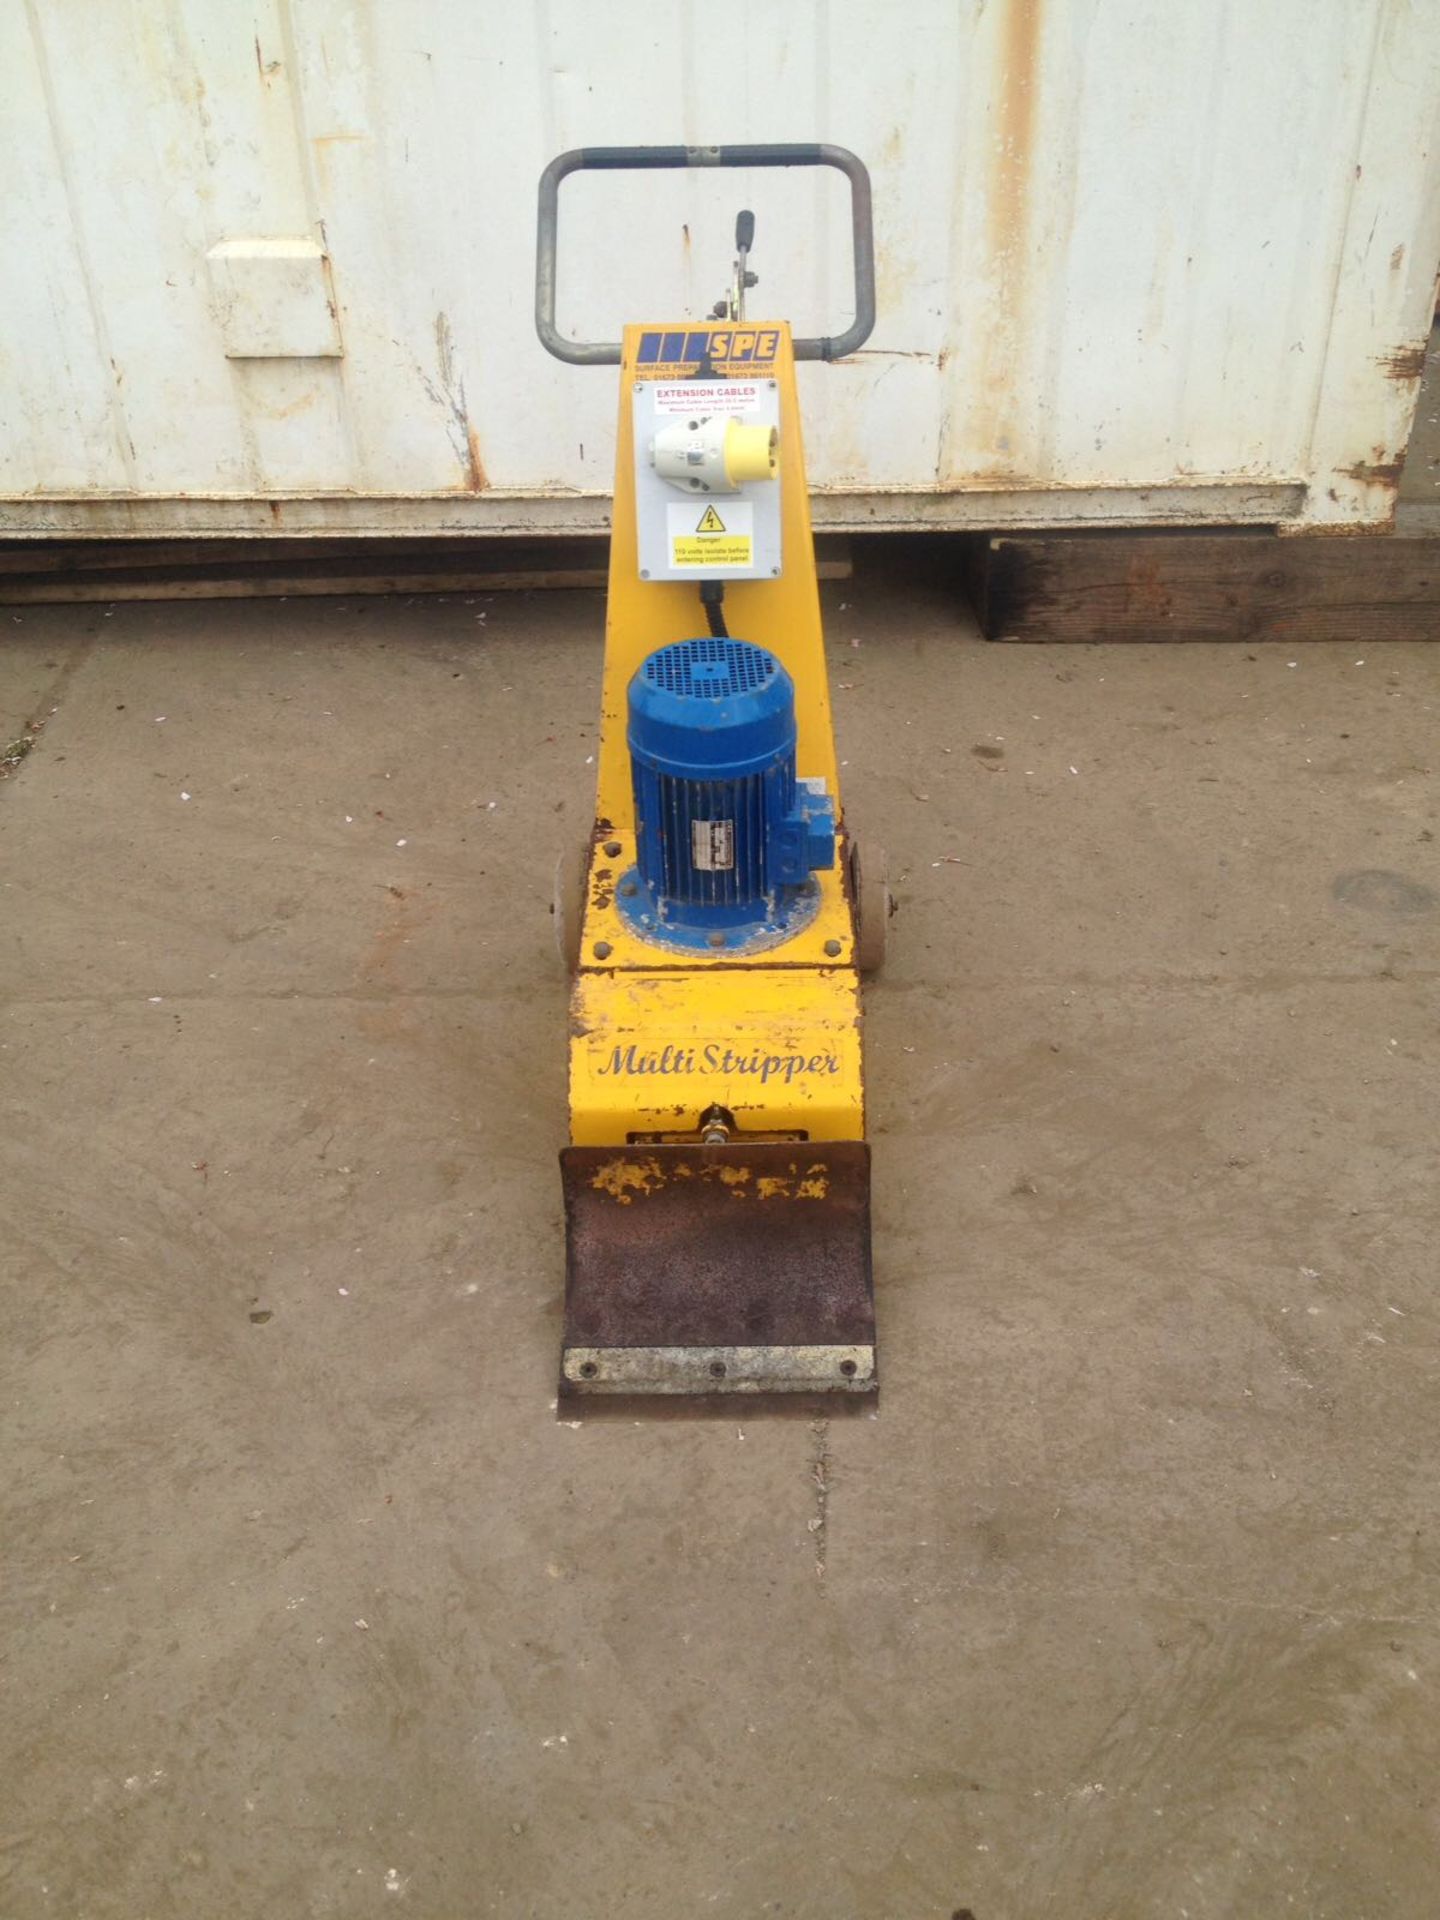 DM - 1X SPE TILE LIFTER, MODEL MS330-1 *PLUS VAT*   110V   COLLECTION / VIEWING FROM CASTLEFORD - Image 2 of 2